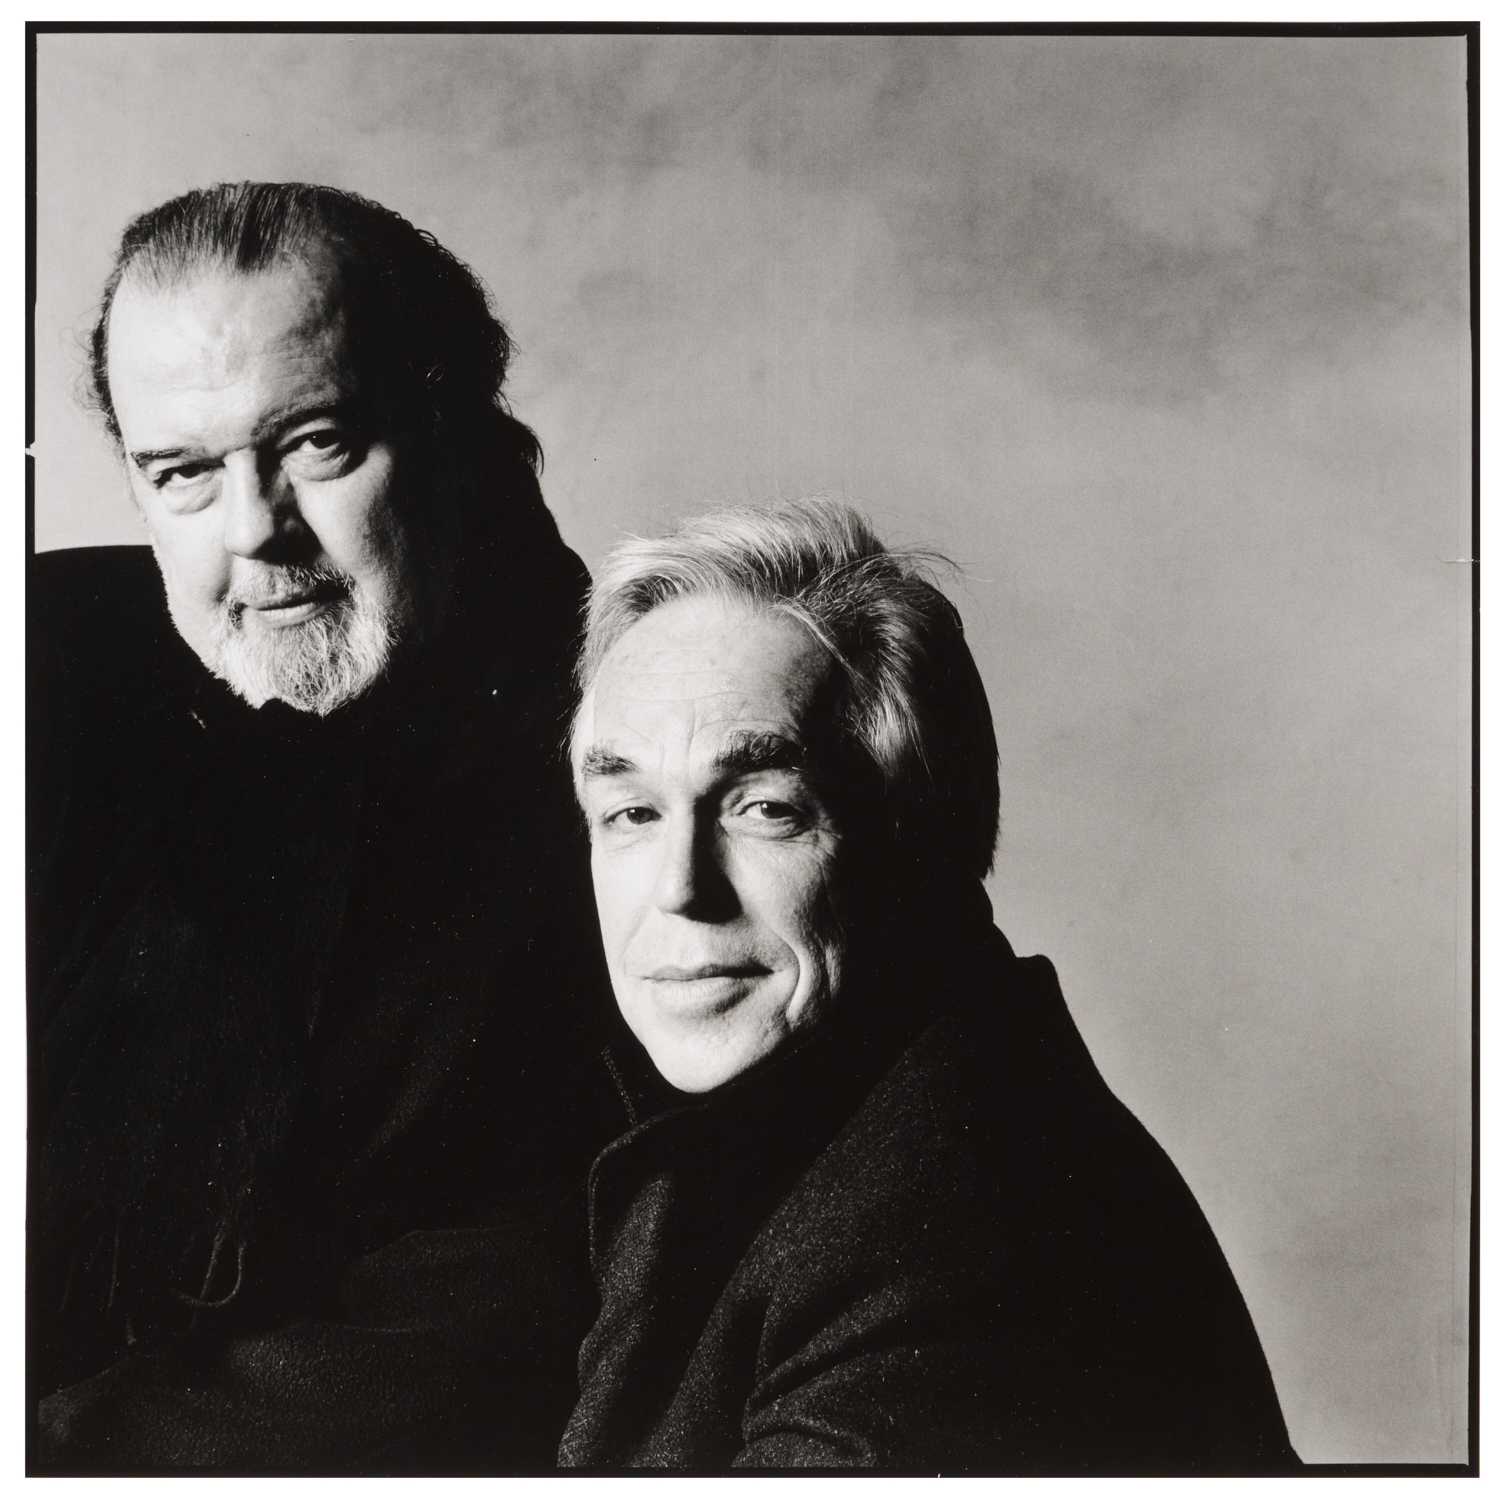 Artwork by Irving Penn, Portrait of Orson Welles and Peter Bogdanovich, Made of gelatin silver photograph